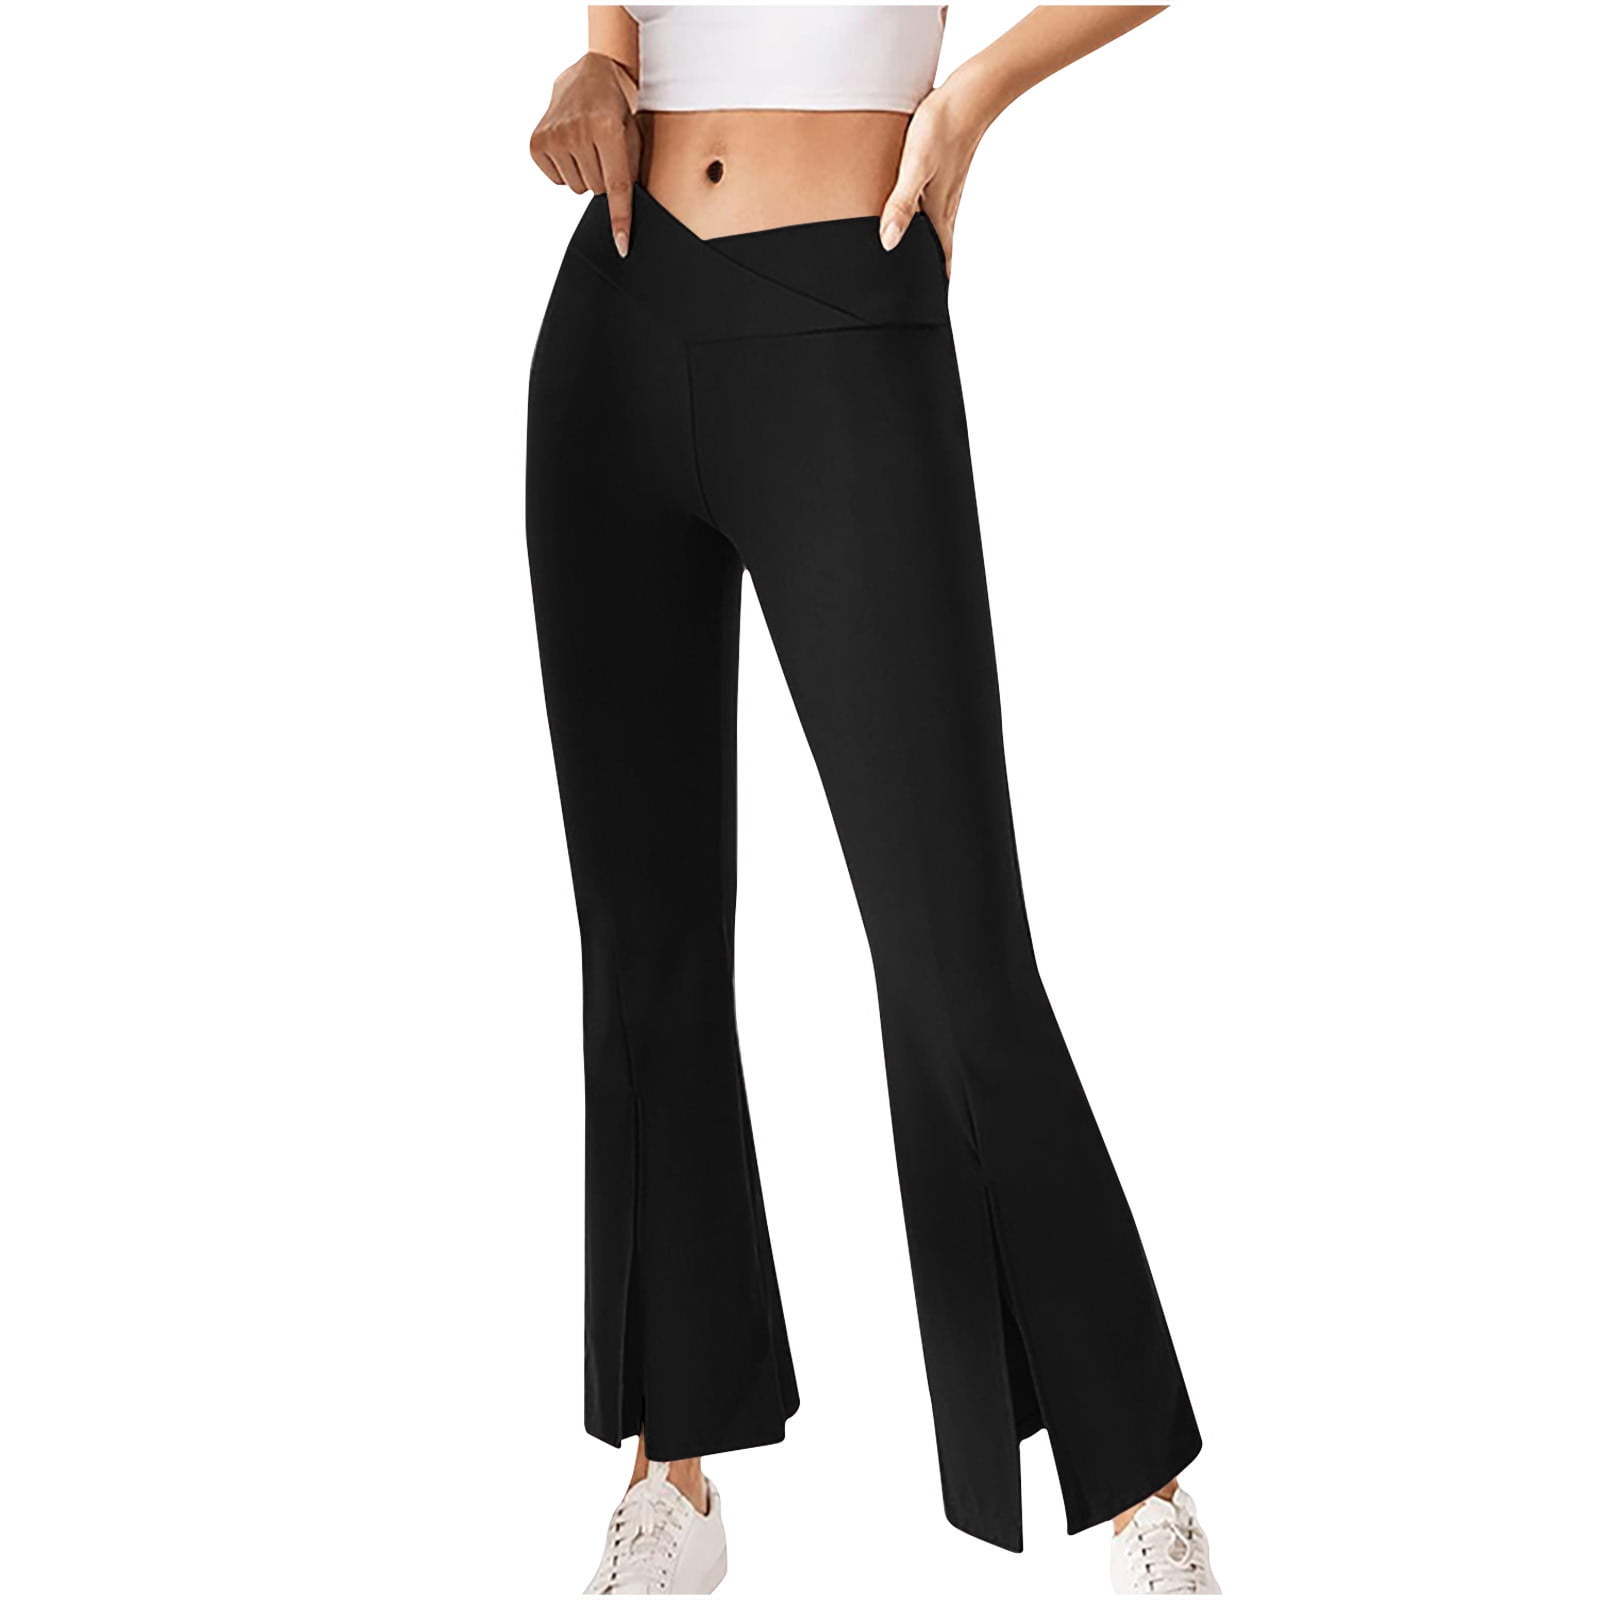 Jalioing Yoga Flared Pants for Women High Waist Split Bottom Legs  Flattering Comfy Brief Lounge Trousers (XX-Large, Black) 